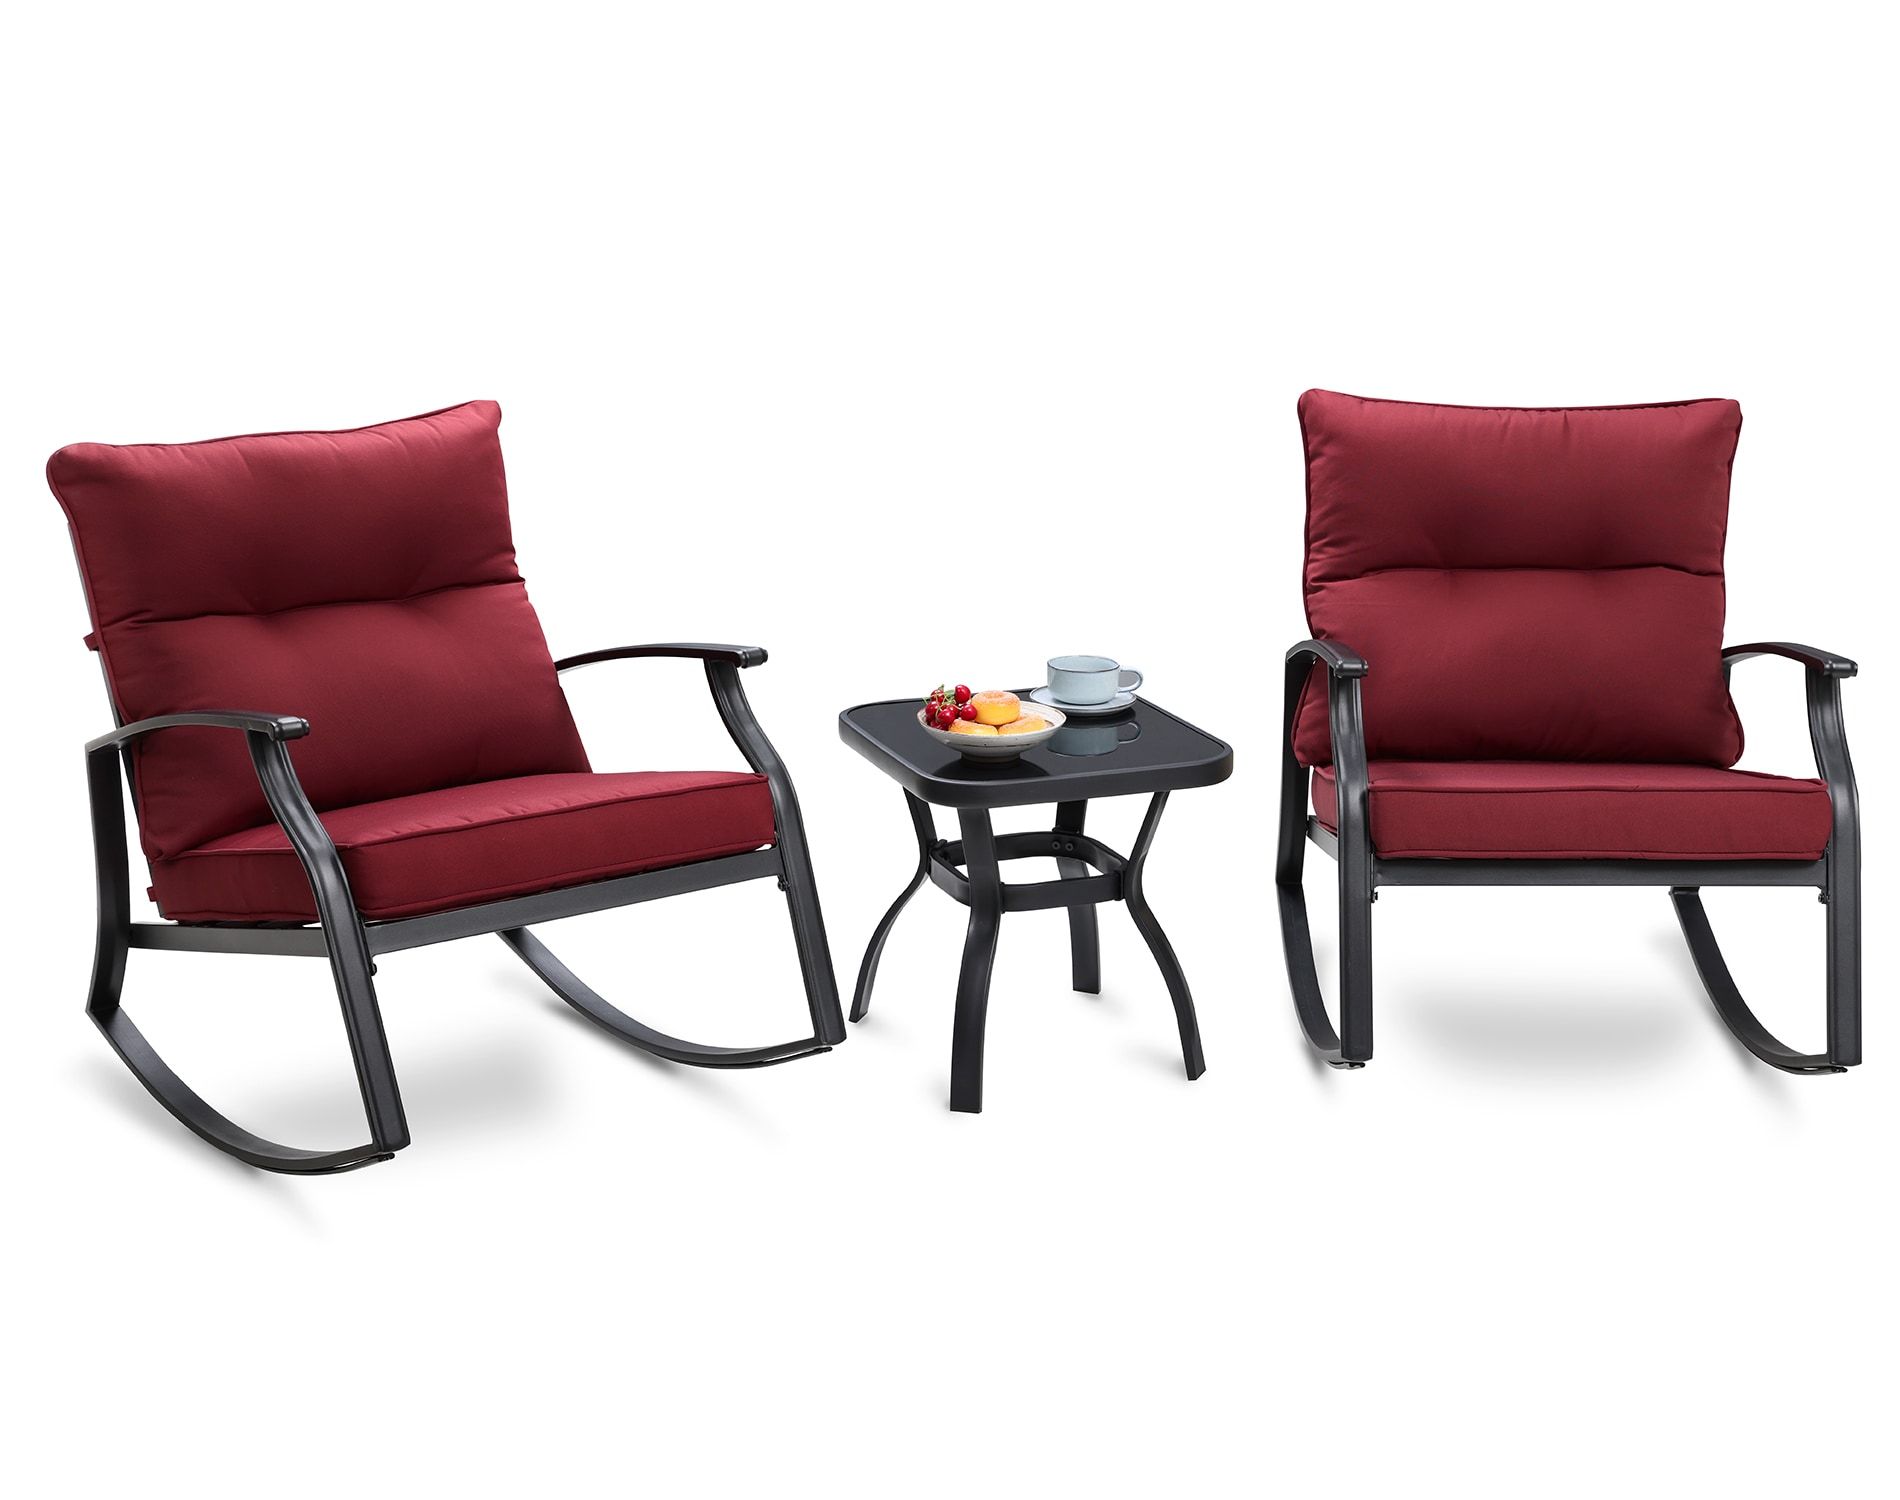 Clihome Patio Rocking Chair 3 Piece Patio Conversation Set With Red Cushions  In The Patio Conversation Sets Department At Lowes Within 3 Piece Cushion Rocking Chair Set (View 15 of 15)